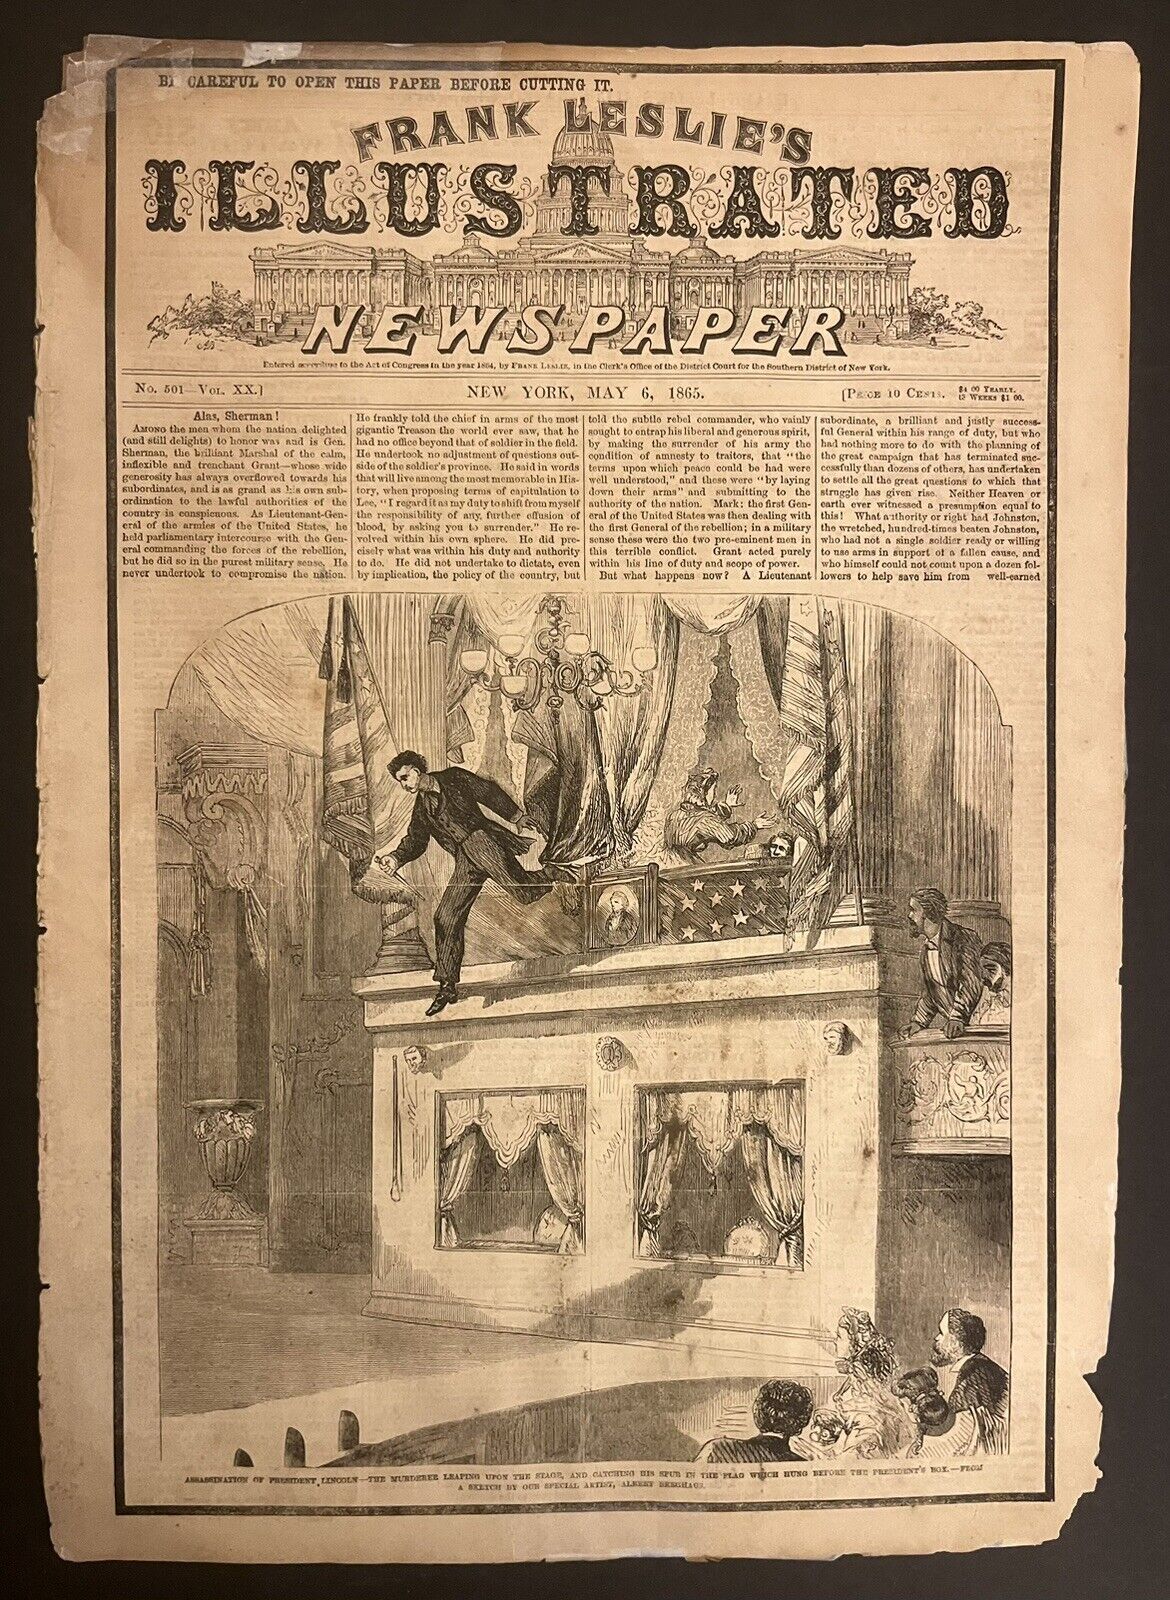 FRANK LESLIE’S LINCOLN ASSASSINATION MAY 6, 1865 ~ 44” 4-PAGE FUNERAL FOLD-OUT